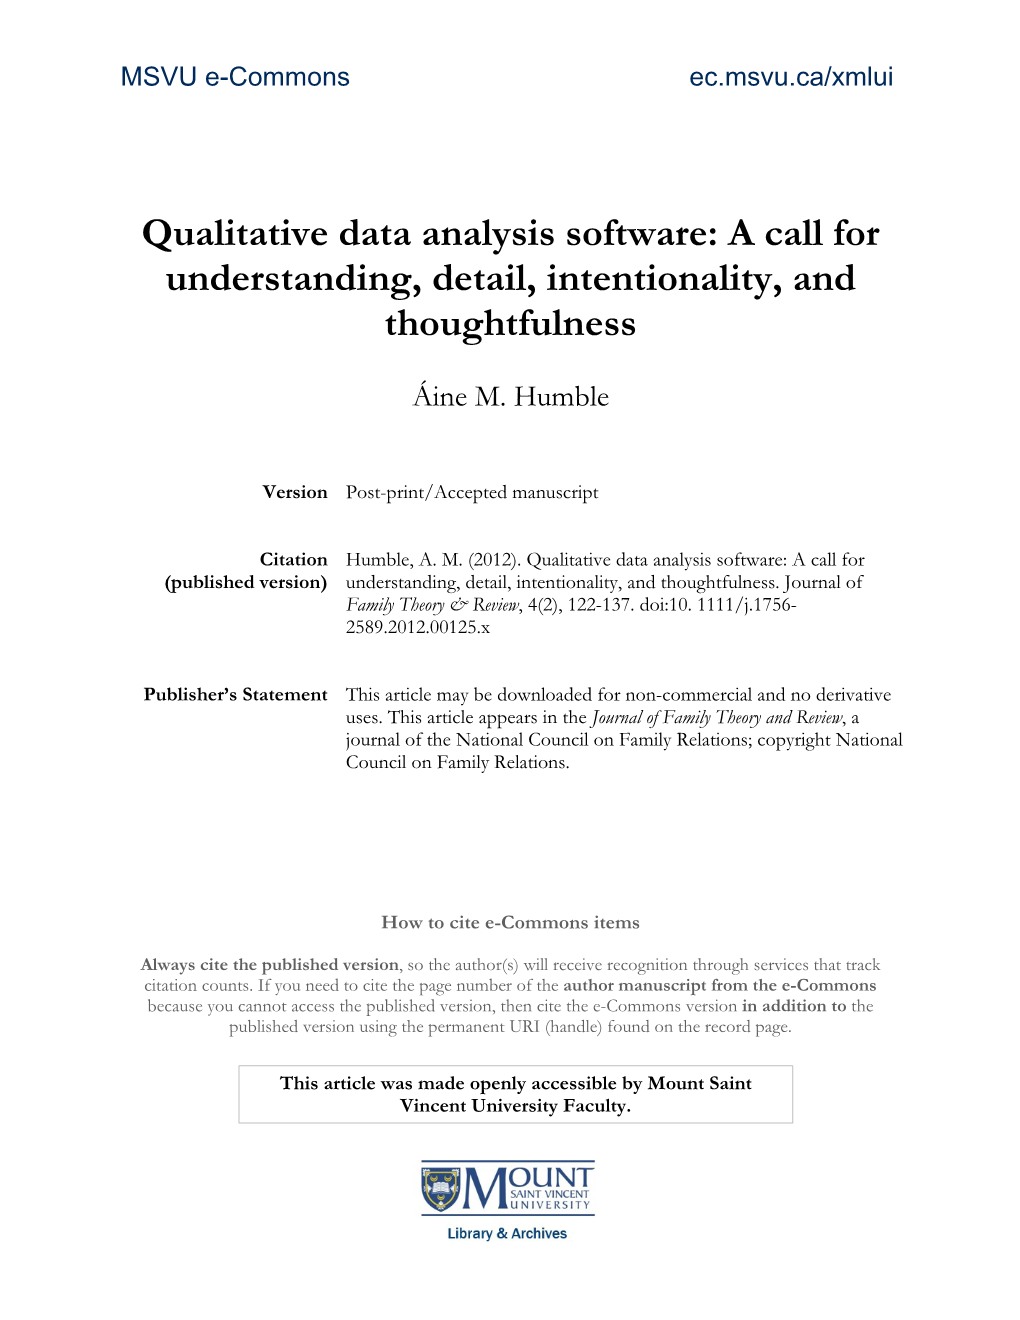 Qualitative Data Analysis Software: a Call for Understanding, Detail, Intentionality, and Thoughtfulness